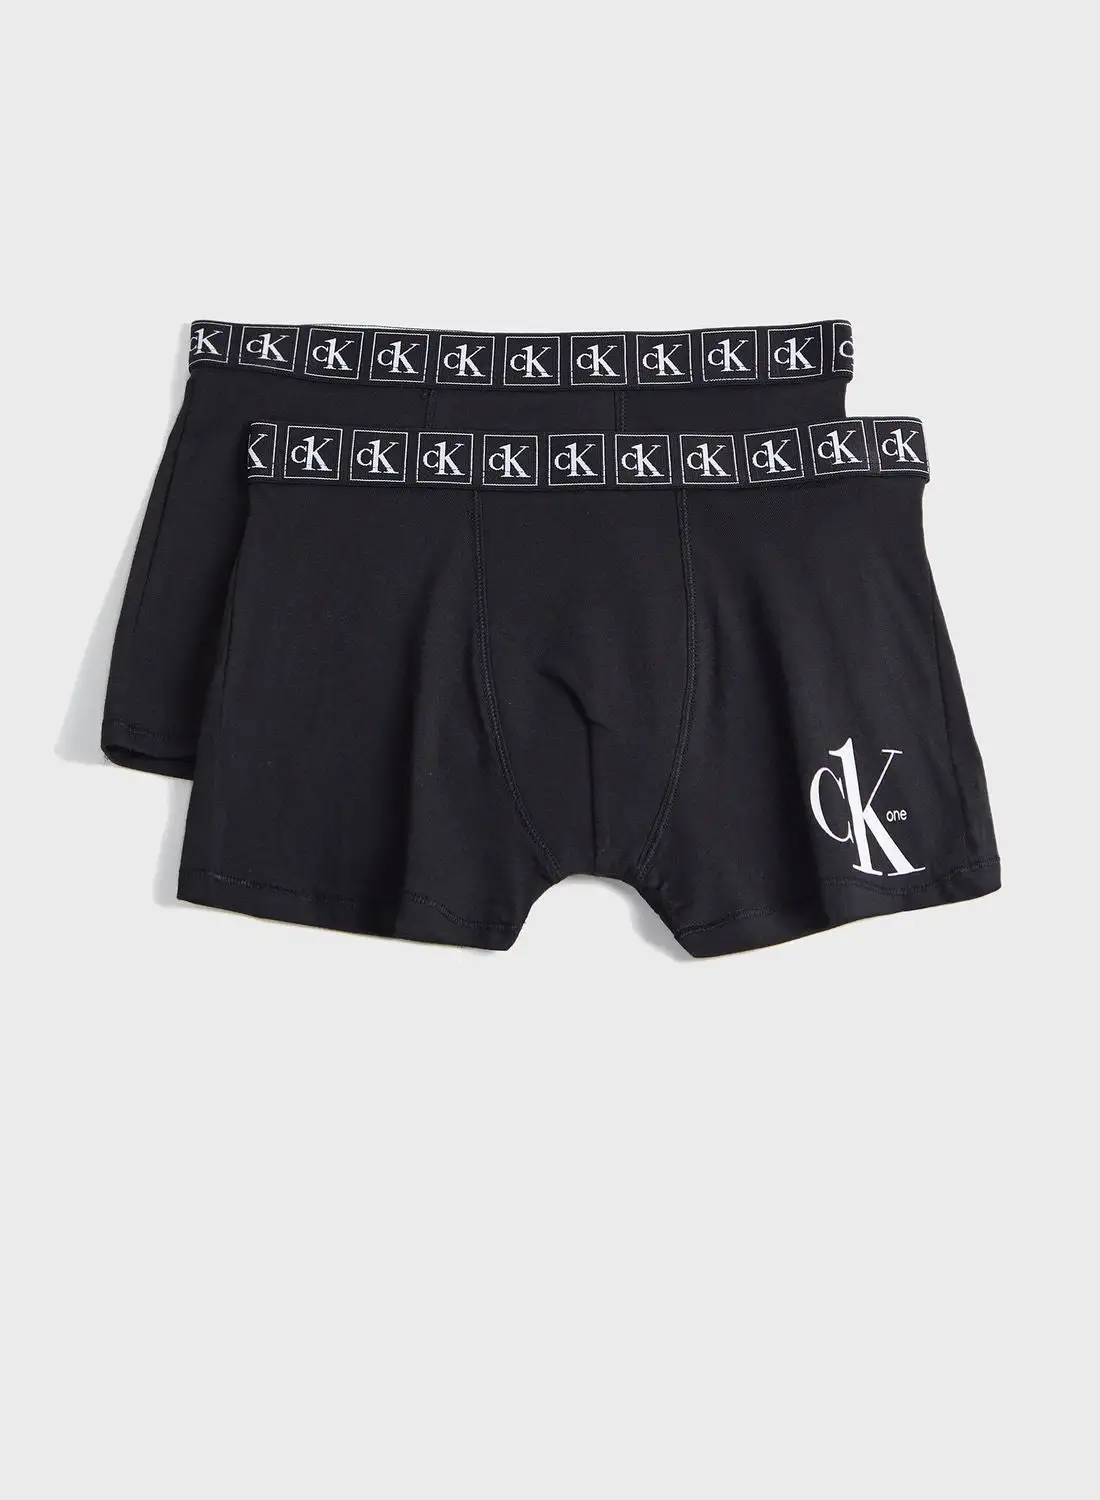 CALVIN KLEIN Youth 2 Pack Assorted Trunks